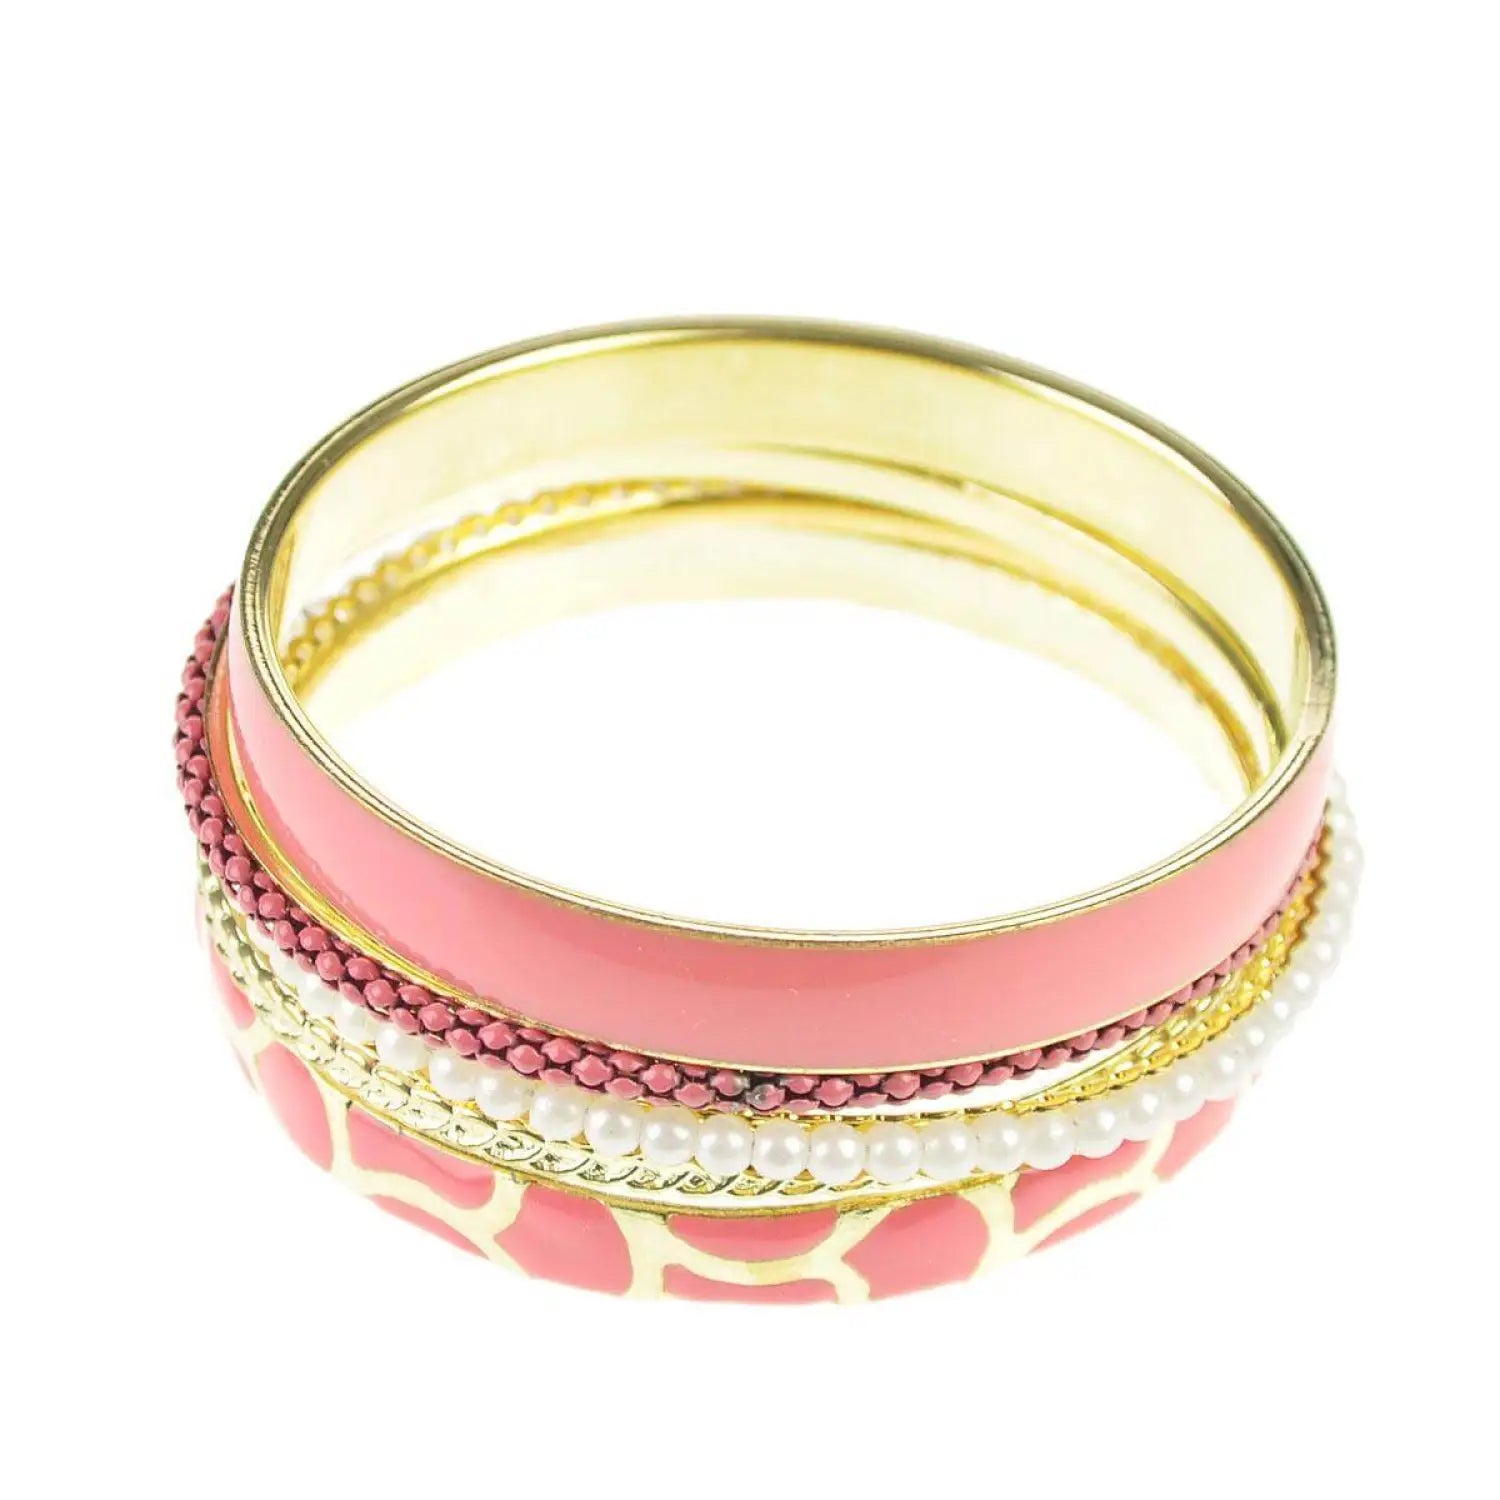 Pink and gold metal stackable bangle with pearls - Vibrant Indian Wedding Bridal Bracelet